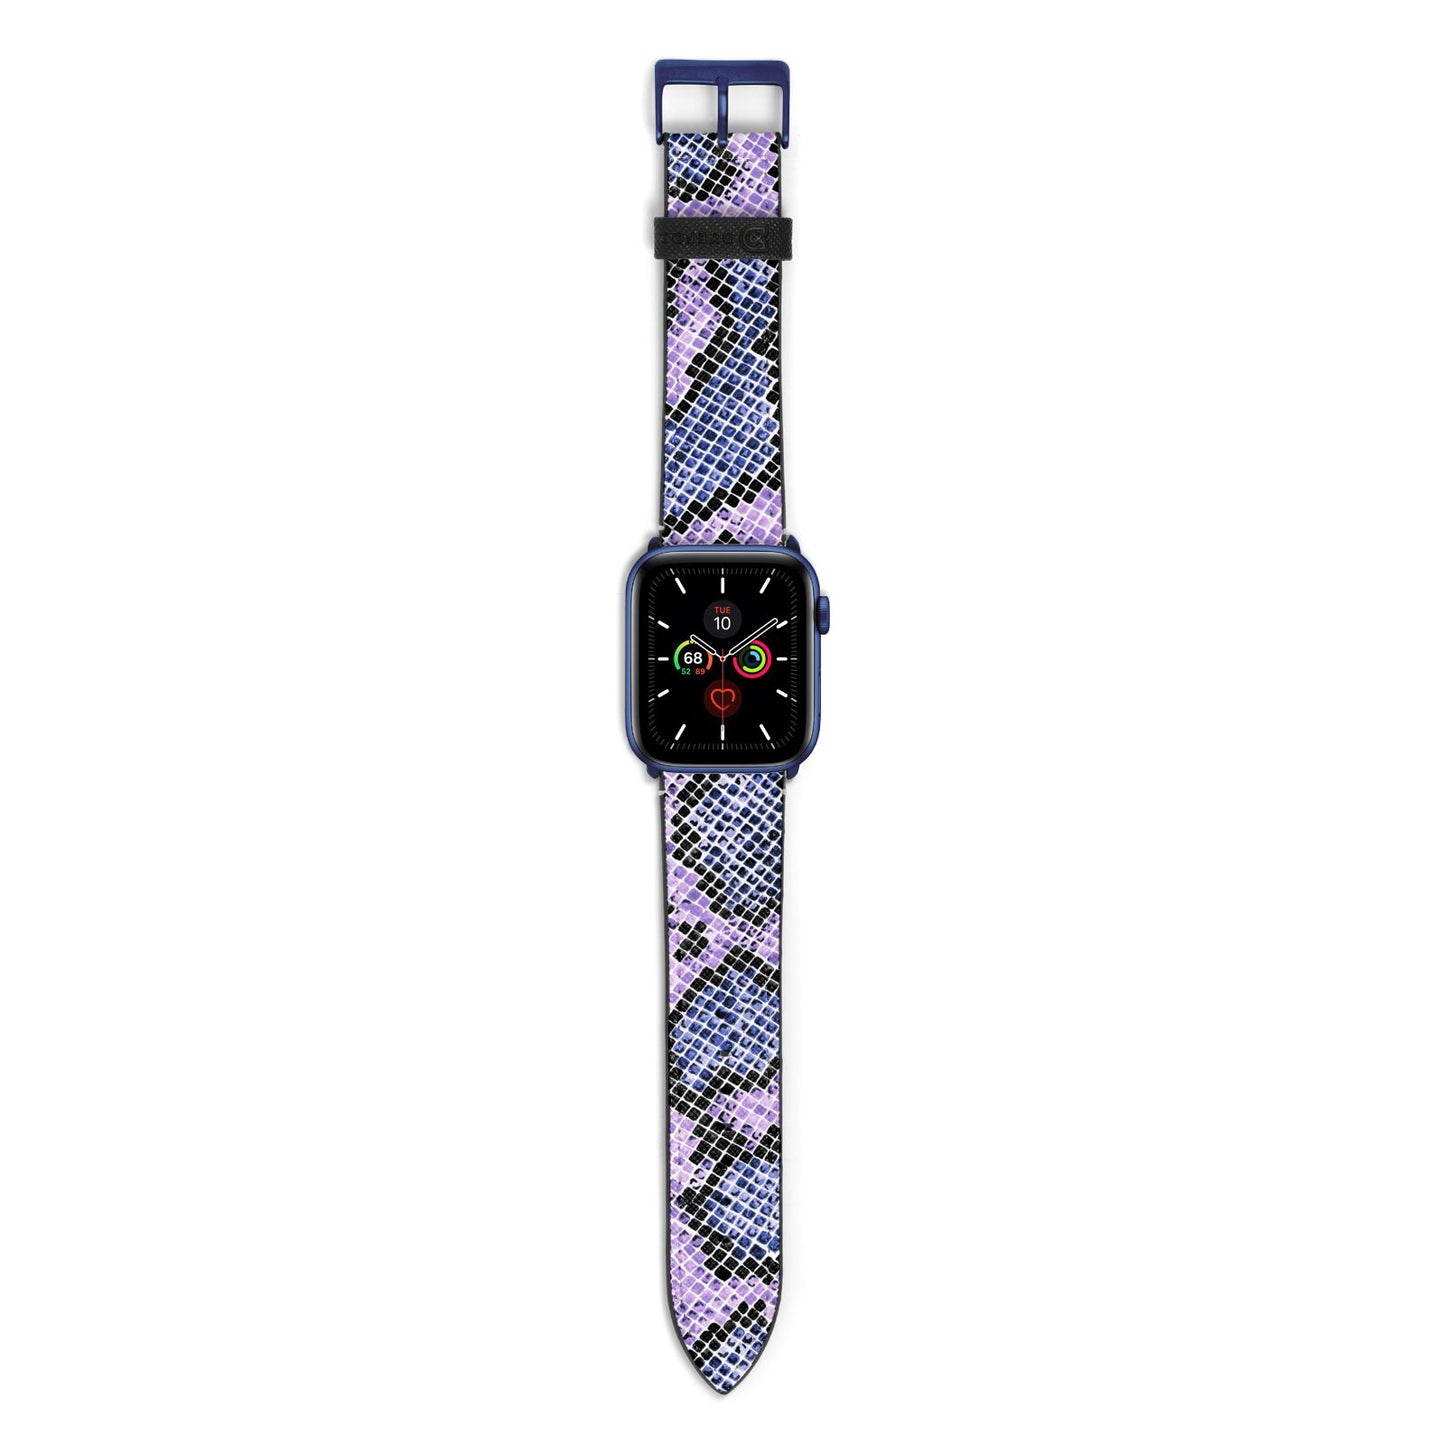 Purple And Blue Snakeskin Apple Watch Strap with Blue Hardware